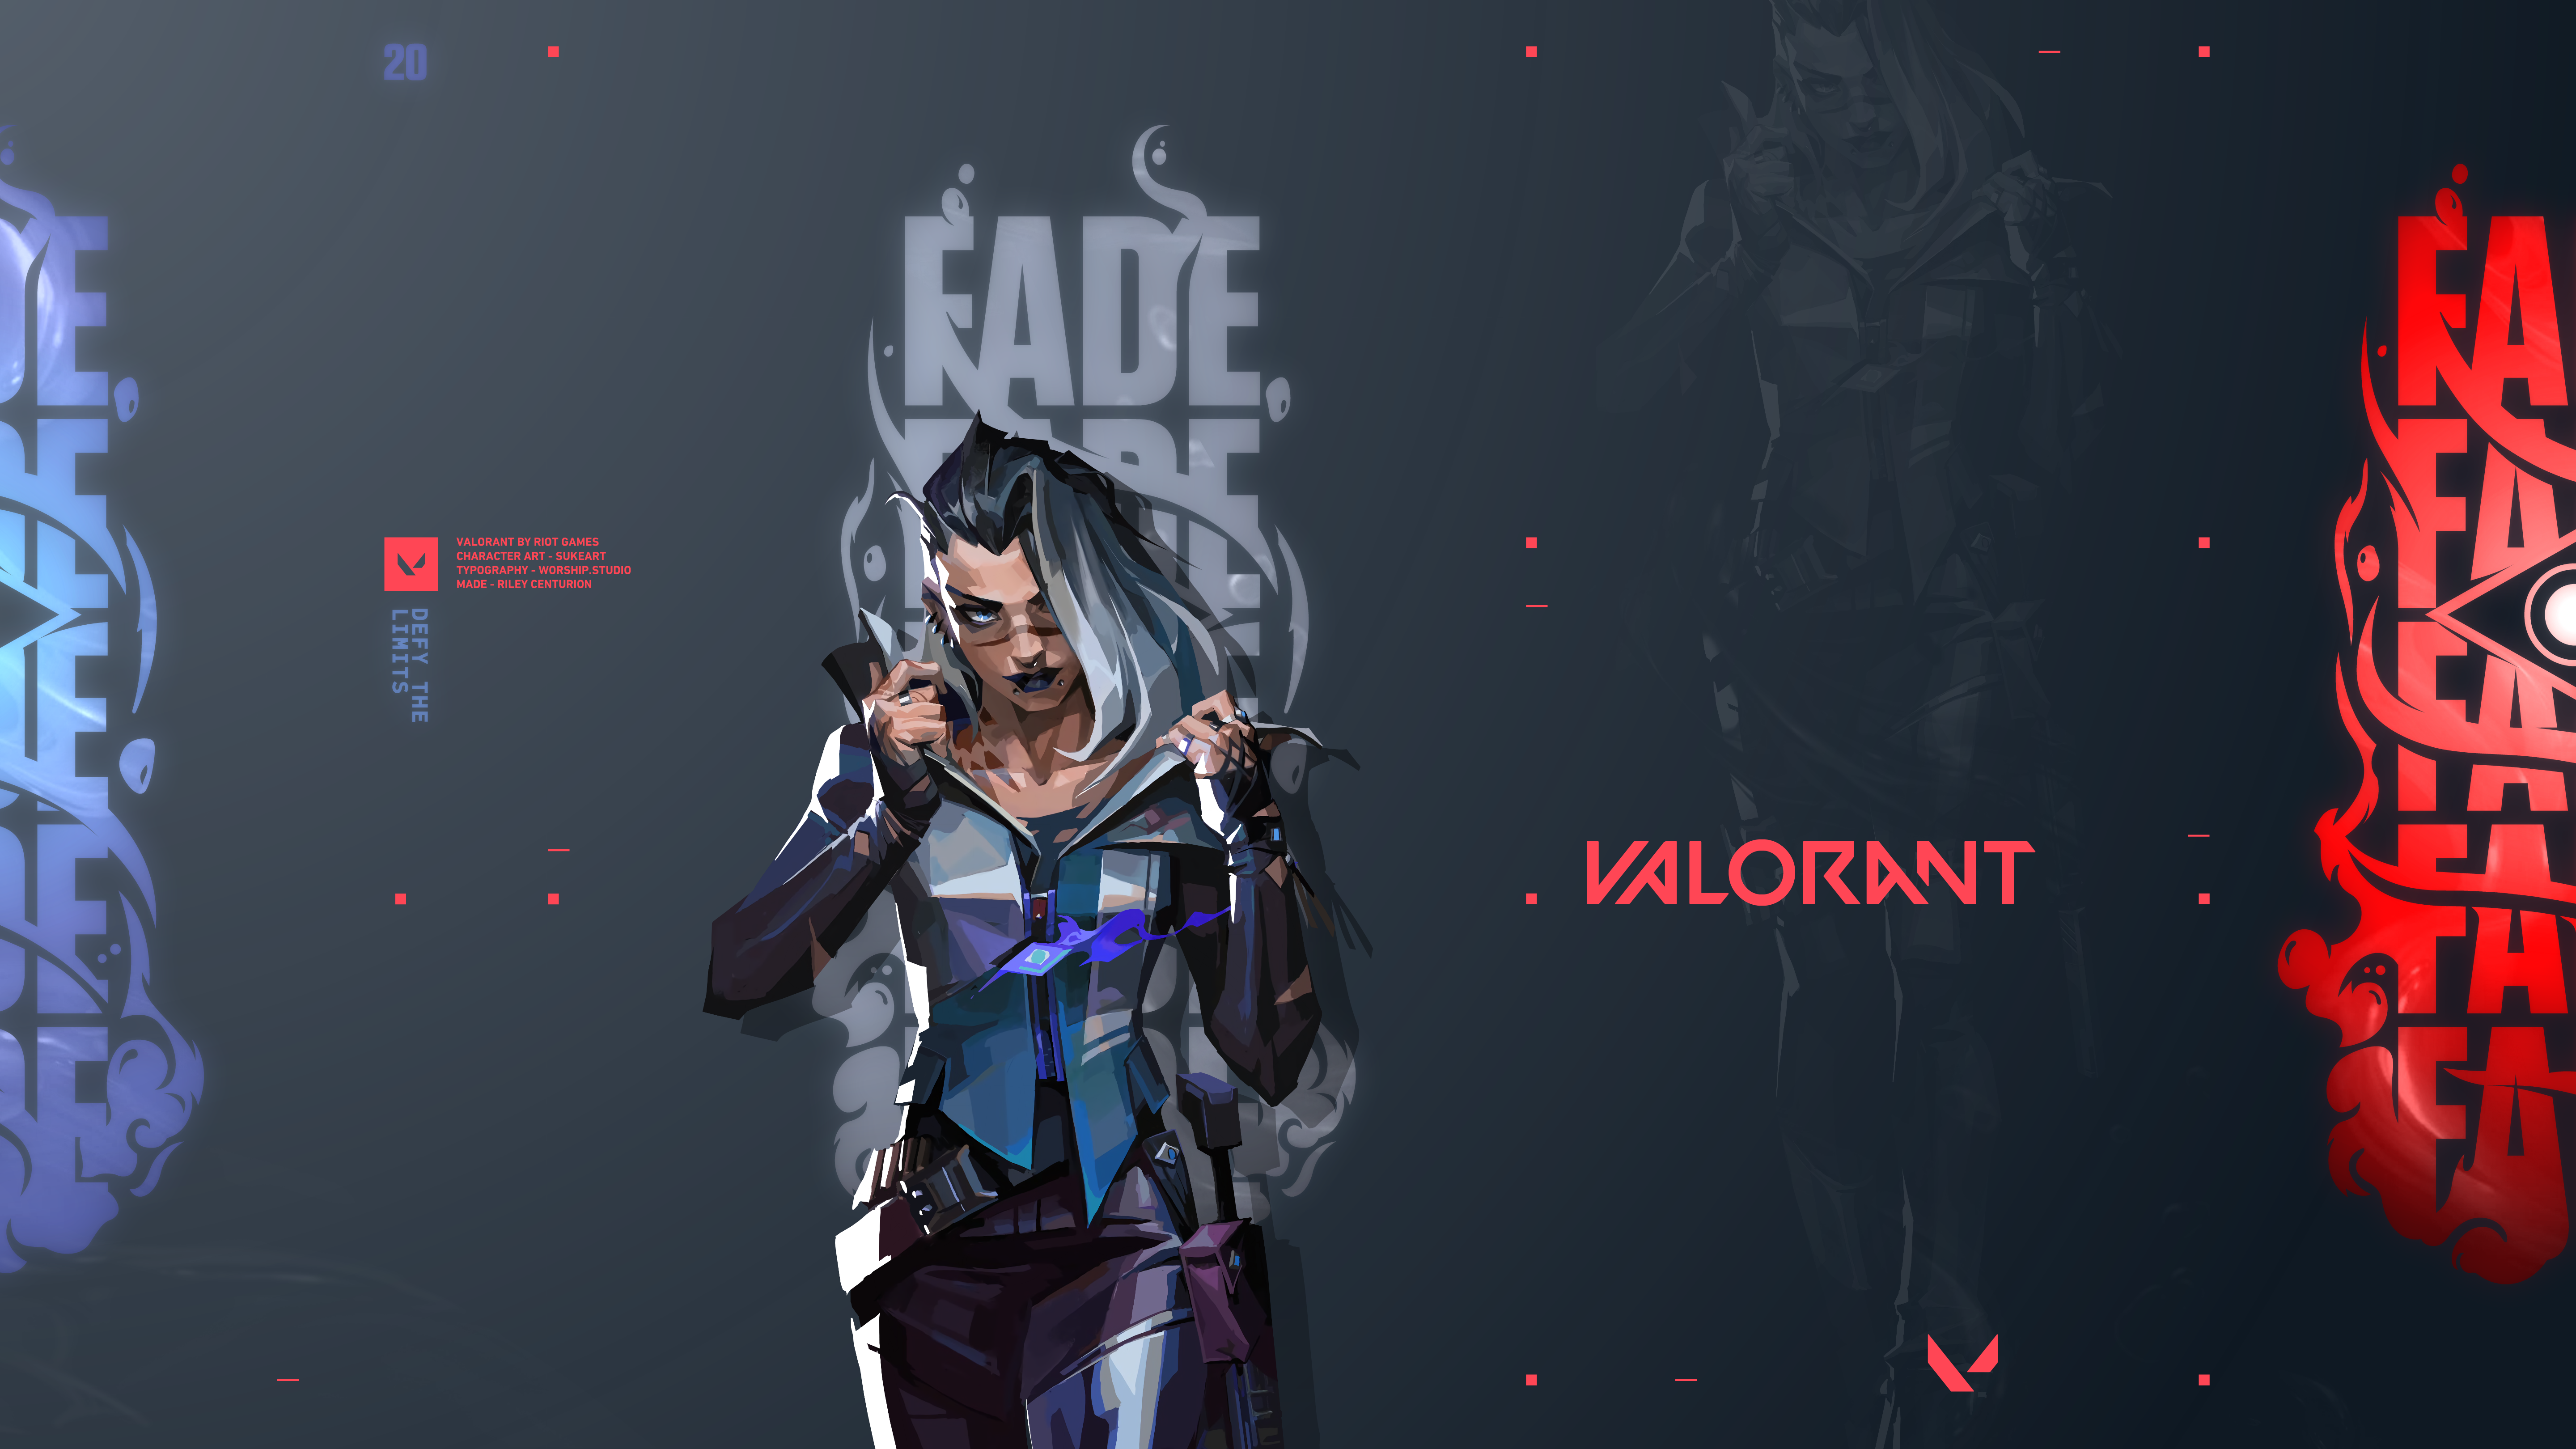 Fade animated wallpaper is here! Link in comment : r/VALORANT